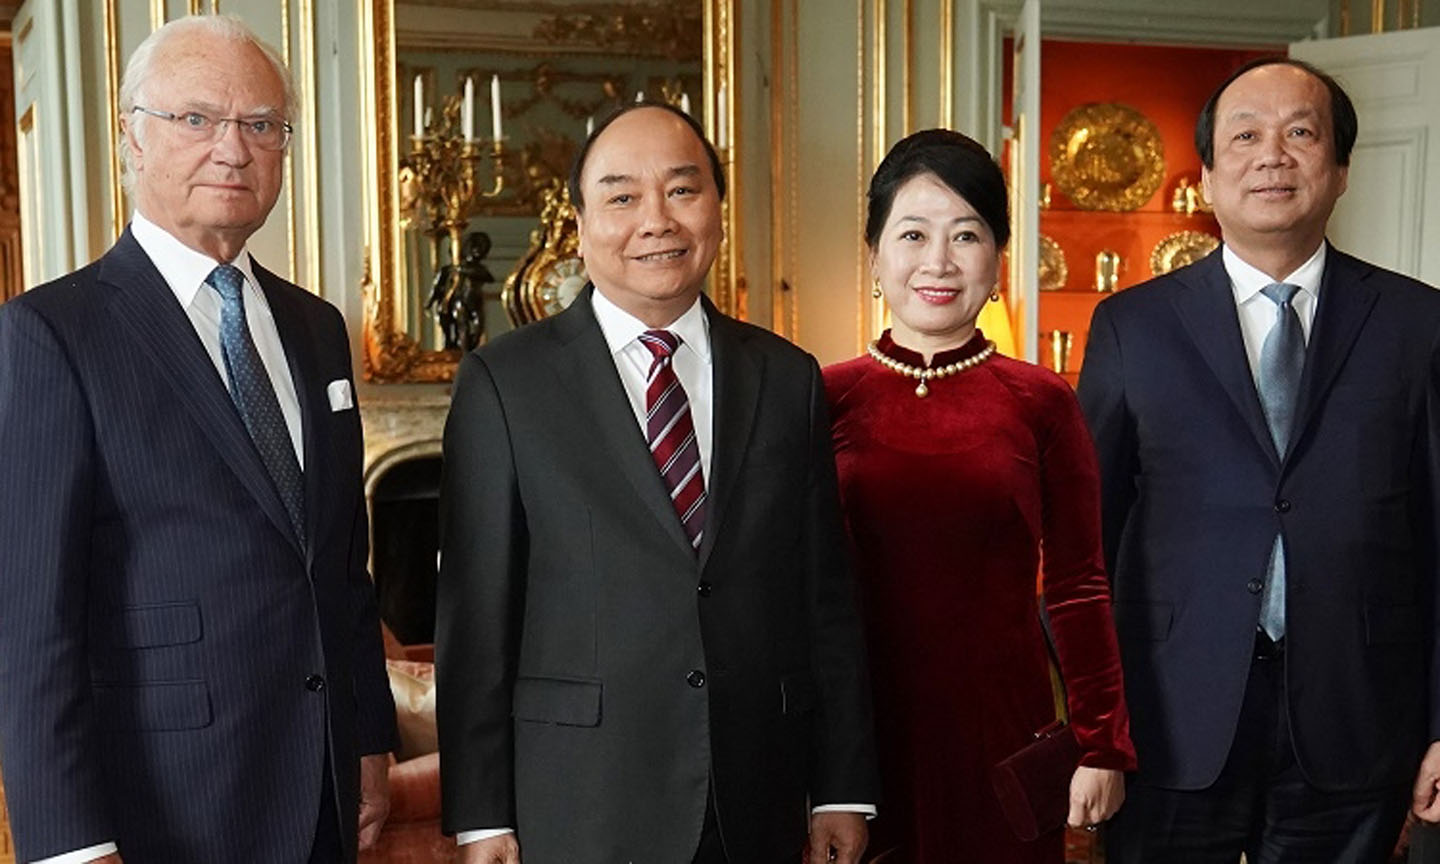 Prime Minister Nguyen Xuan Phuc and his spouse during a meeting with King of Sweden Carl XVI Gustaf (Photo: VGP)